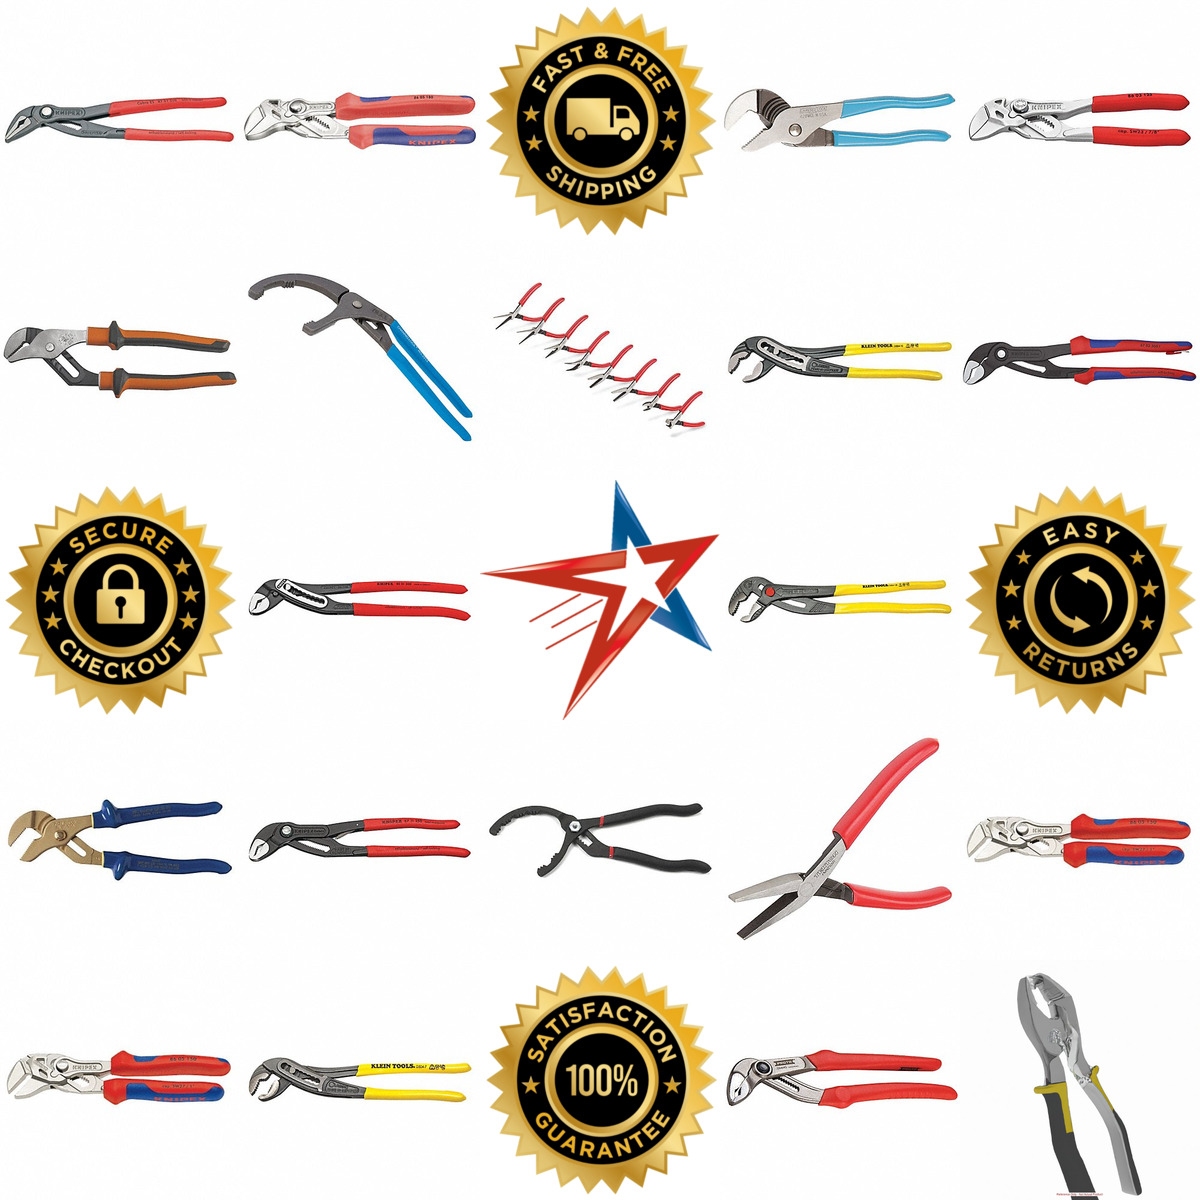 A selection of Adjustable Tongue and Groove Pliers products on GoVets